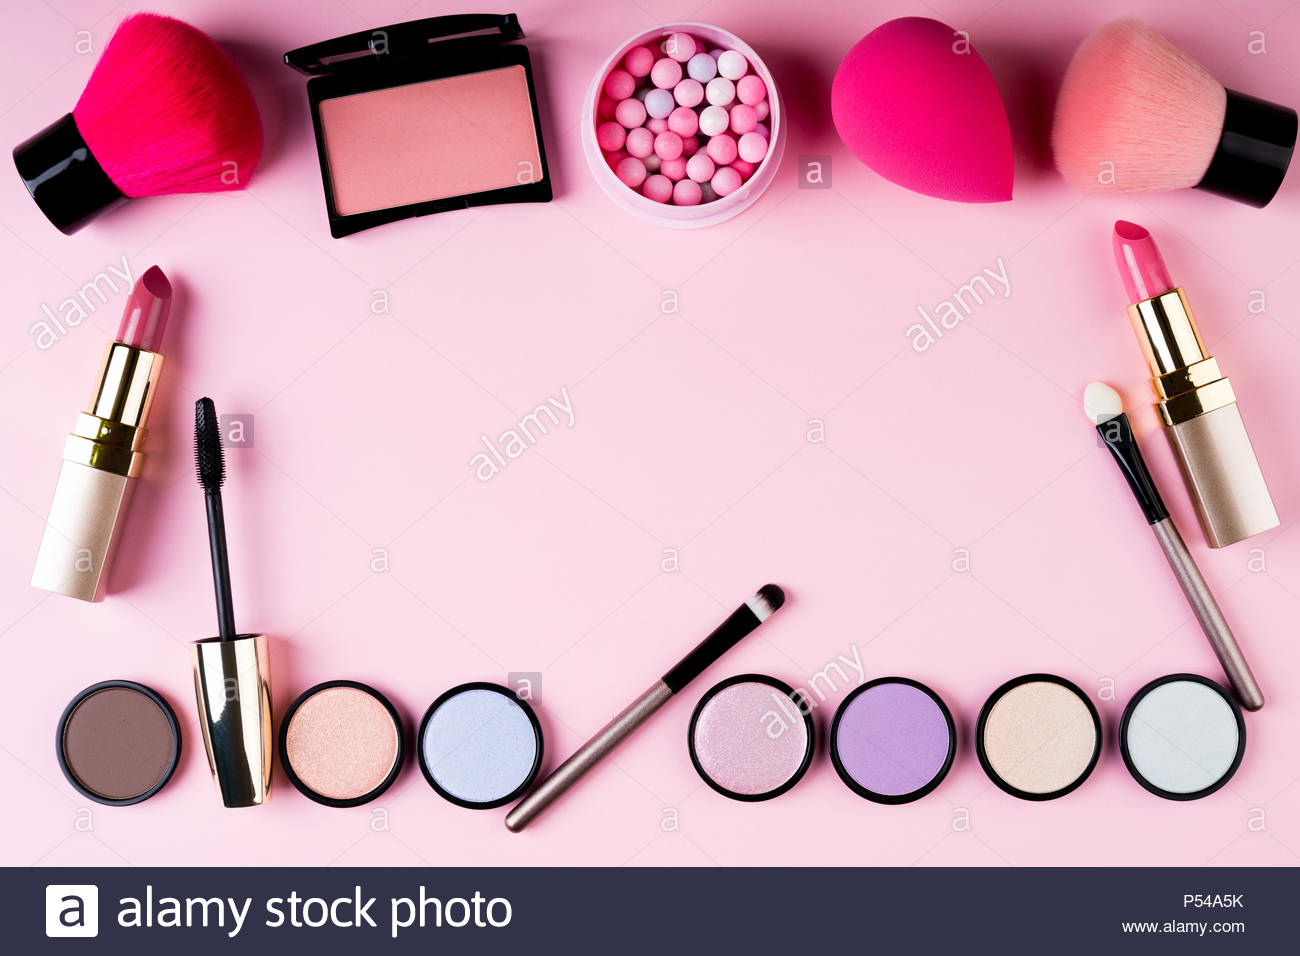 Frame Of Makeup Products And Decorative Cosmetics On Pink